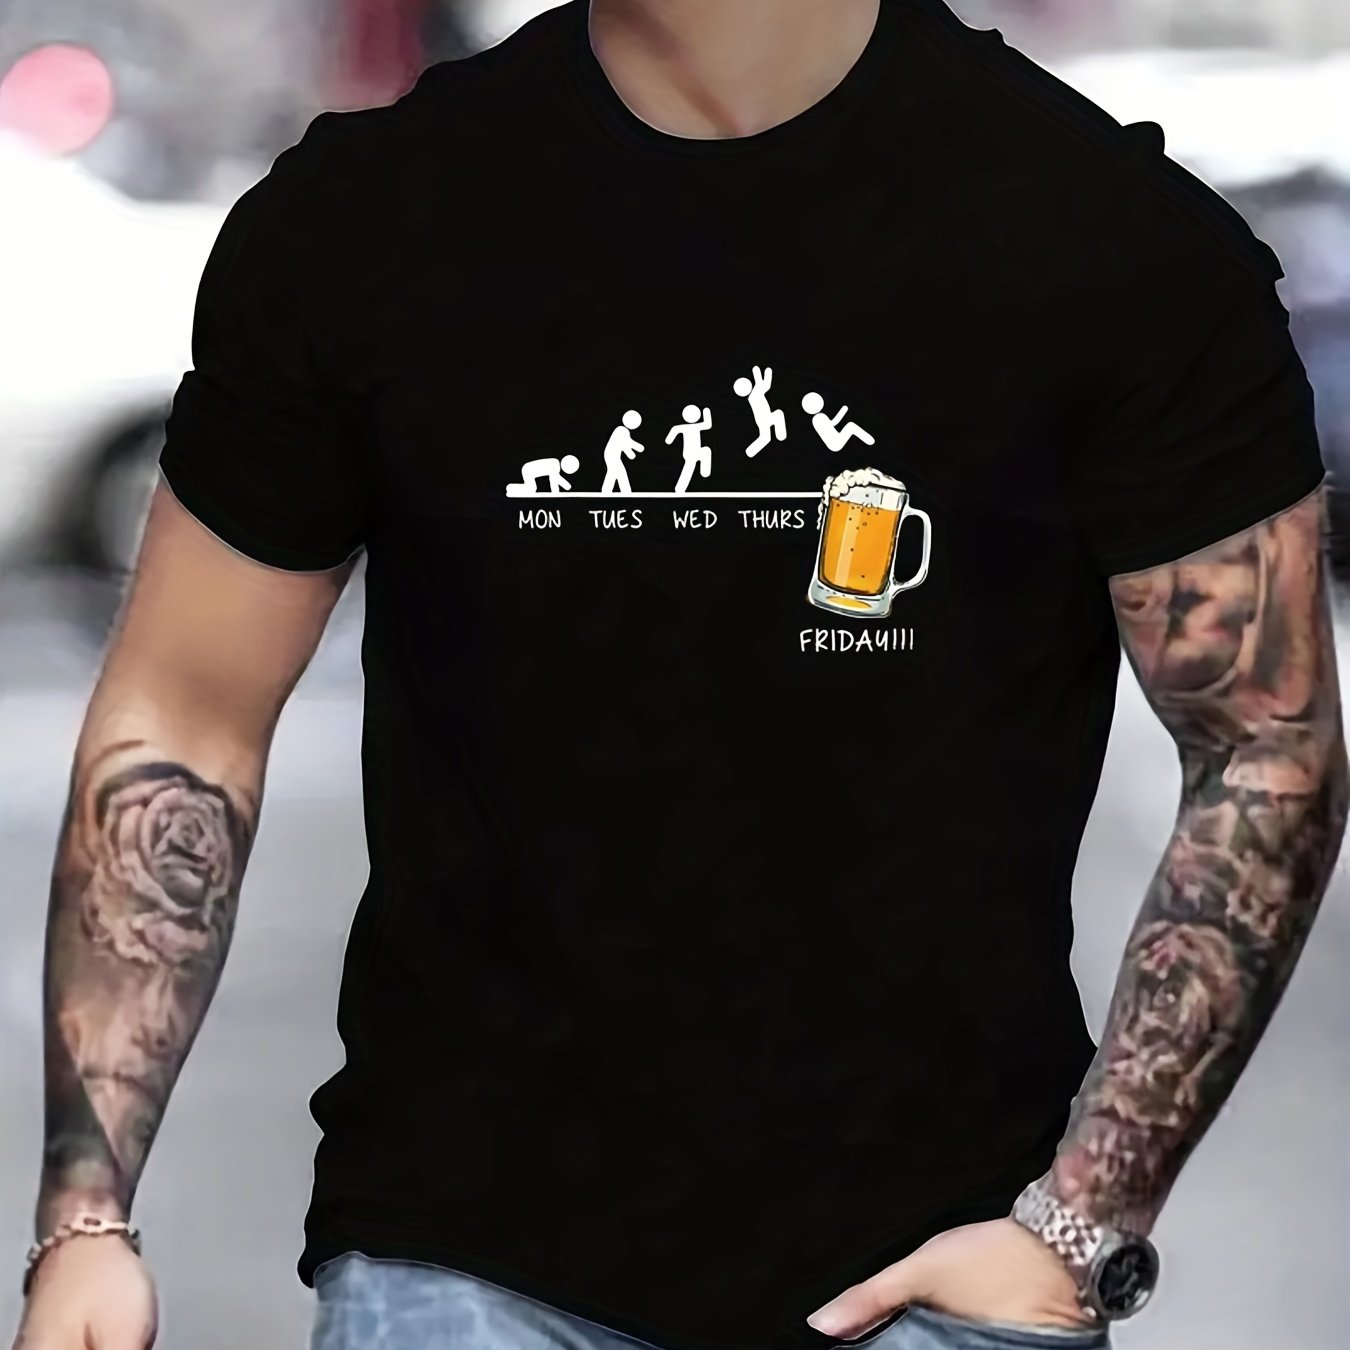 Jumping In Beer Print T-shirt, Men's Casual Street Style Stretch Round Neck Tee Shirt For Summer